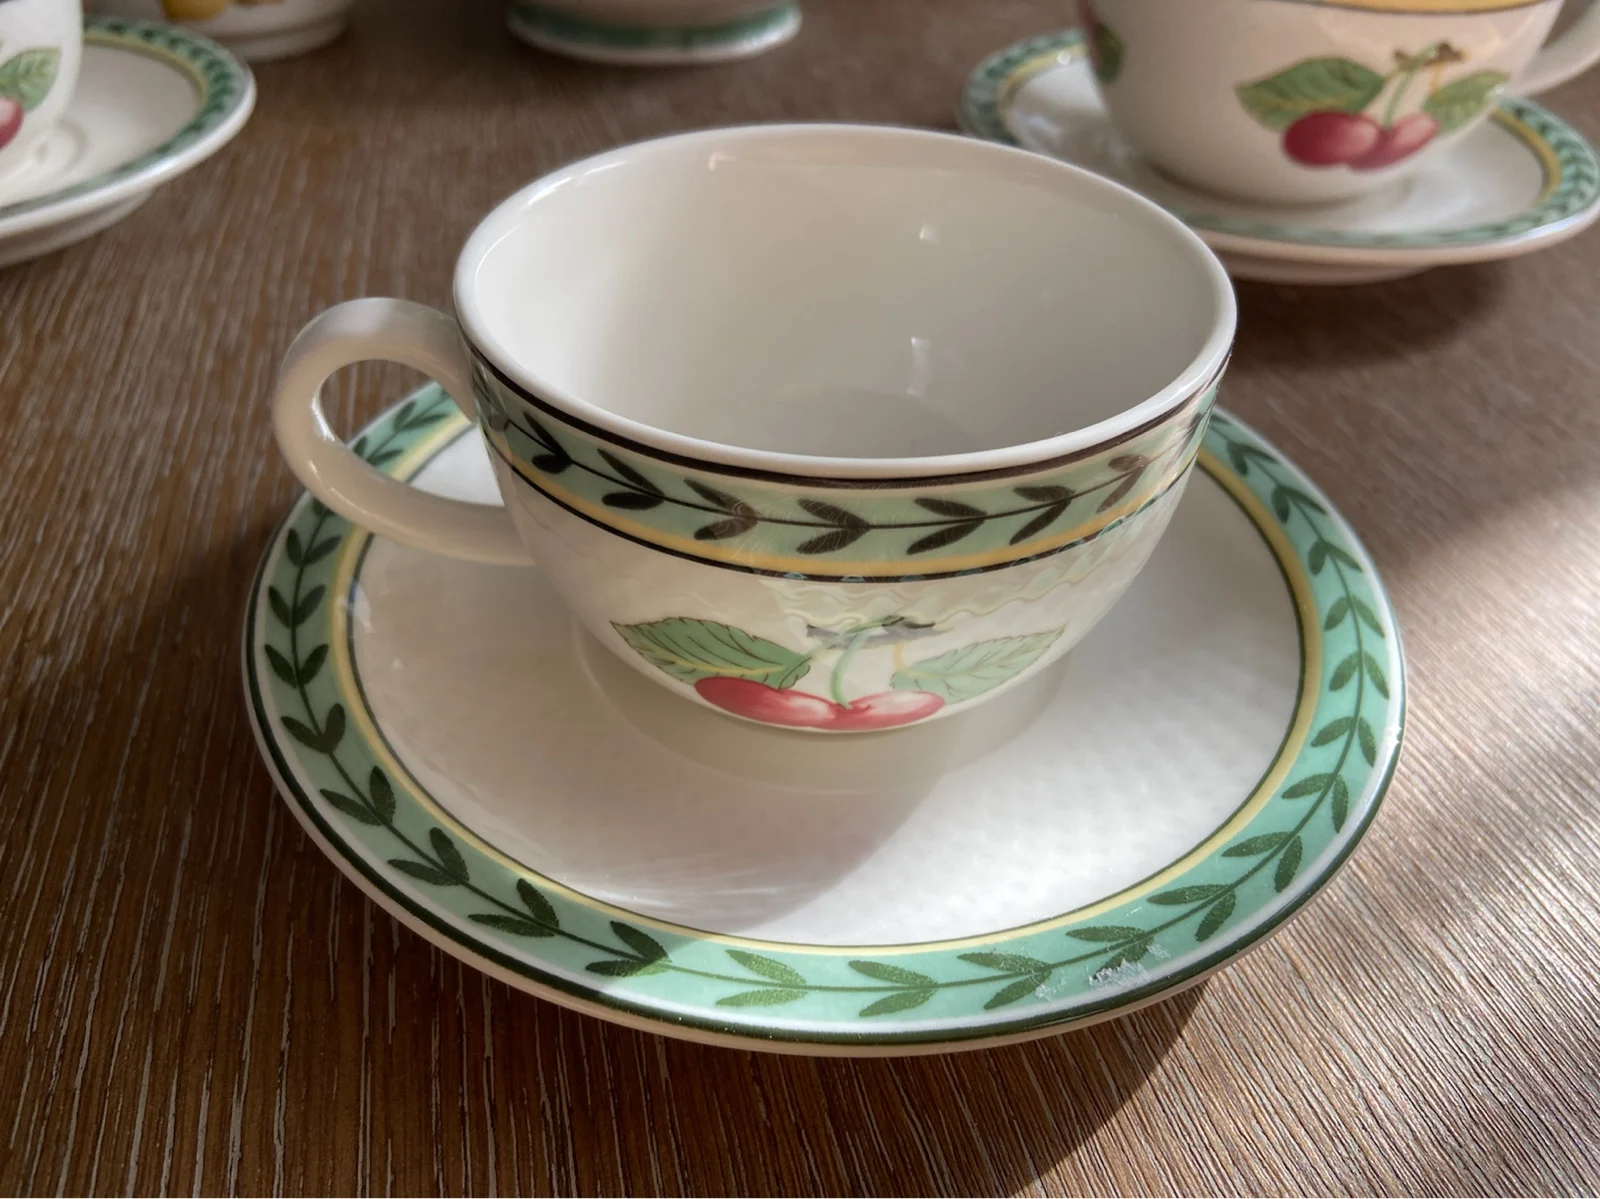 https://ae01.alicdn.com/kf/Se168bc7e830a4201af34ef0809a12835r/Weibao-Villeroy-Boch-Classic-French-Garden-French-Garden-Afternoon-Teapot-Coffee-Cup.jpg